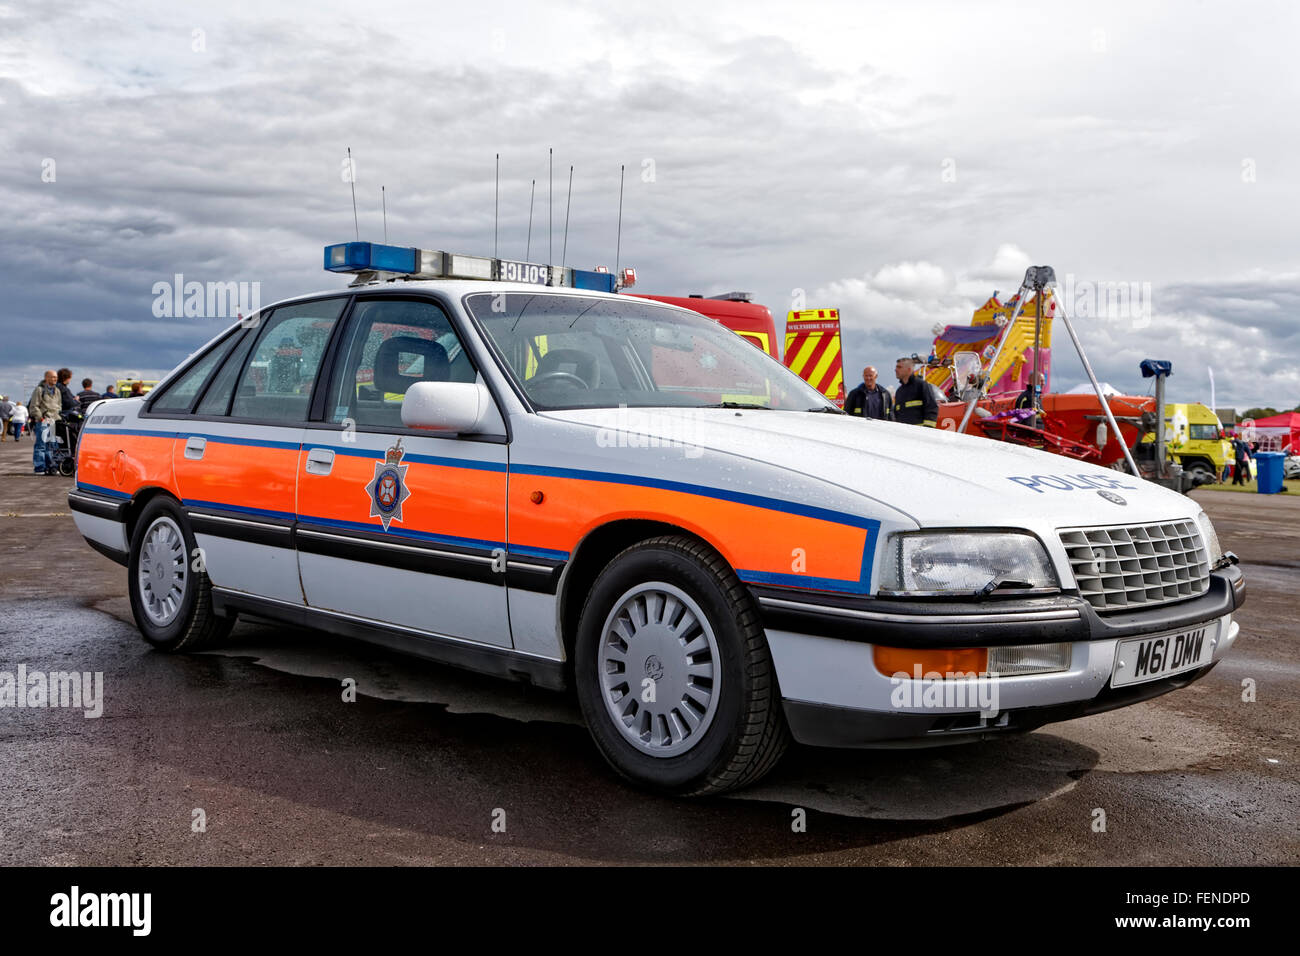 M61 DMW, former Wiltshire Constabulary Vauxhall Senator Traffic Car at the 2013 emergency services show, Hullavington Airfield. Stock Photo